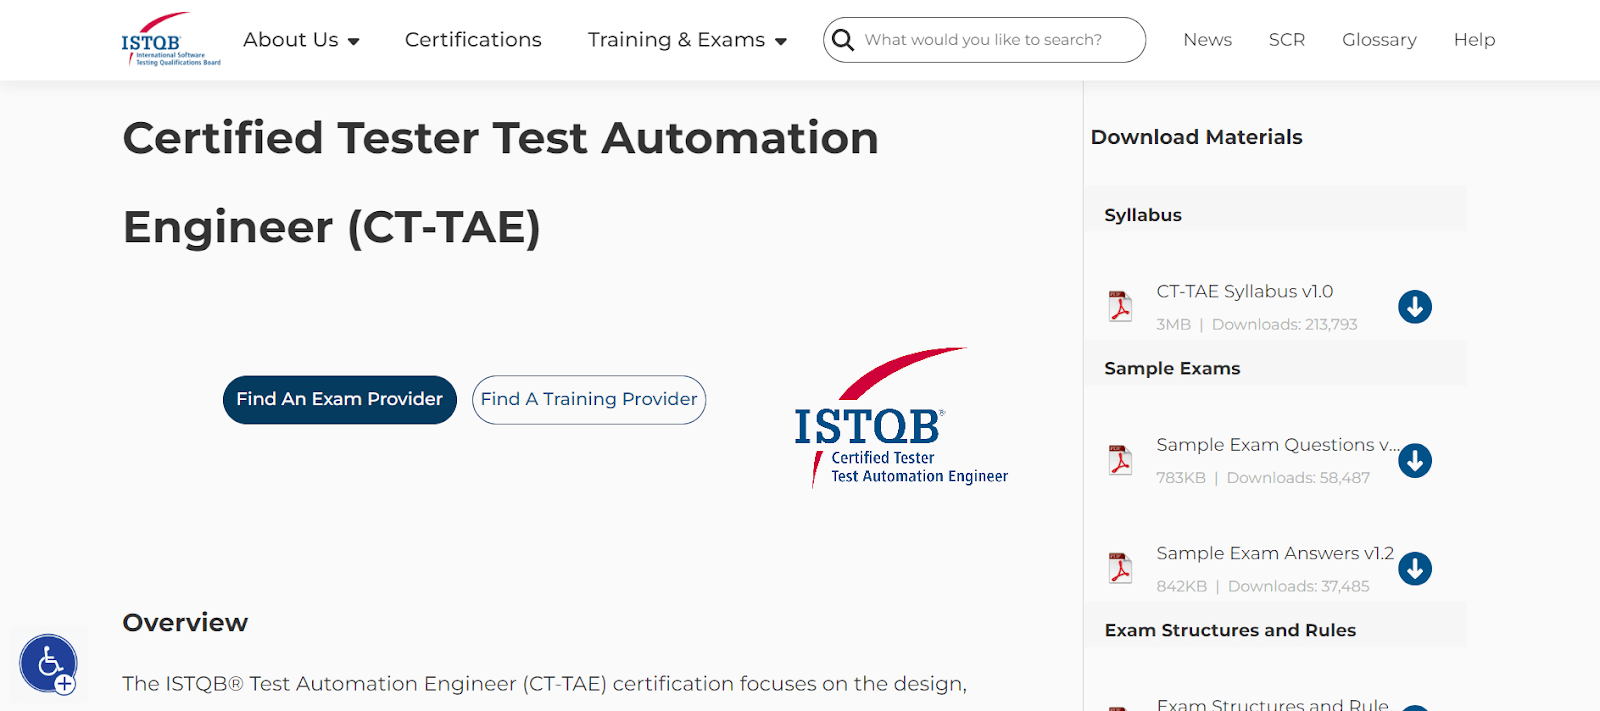 Certified Tester Test Automation Engineer